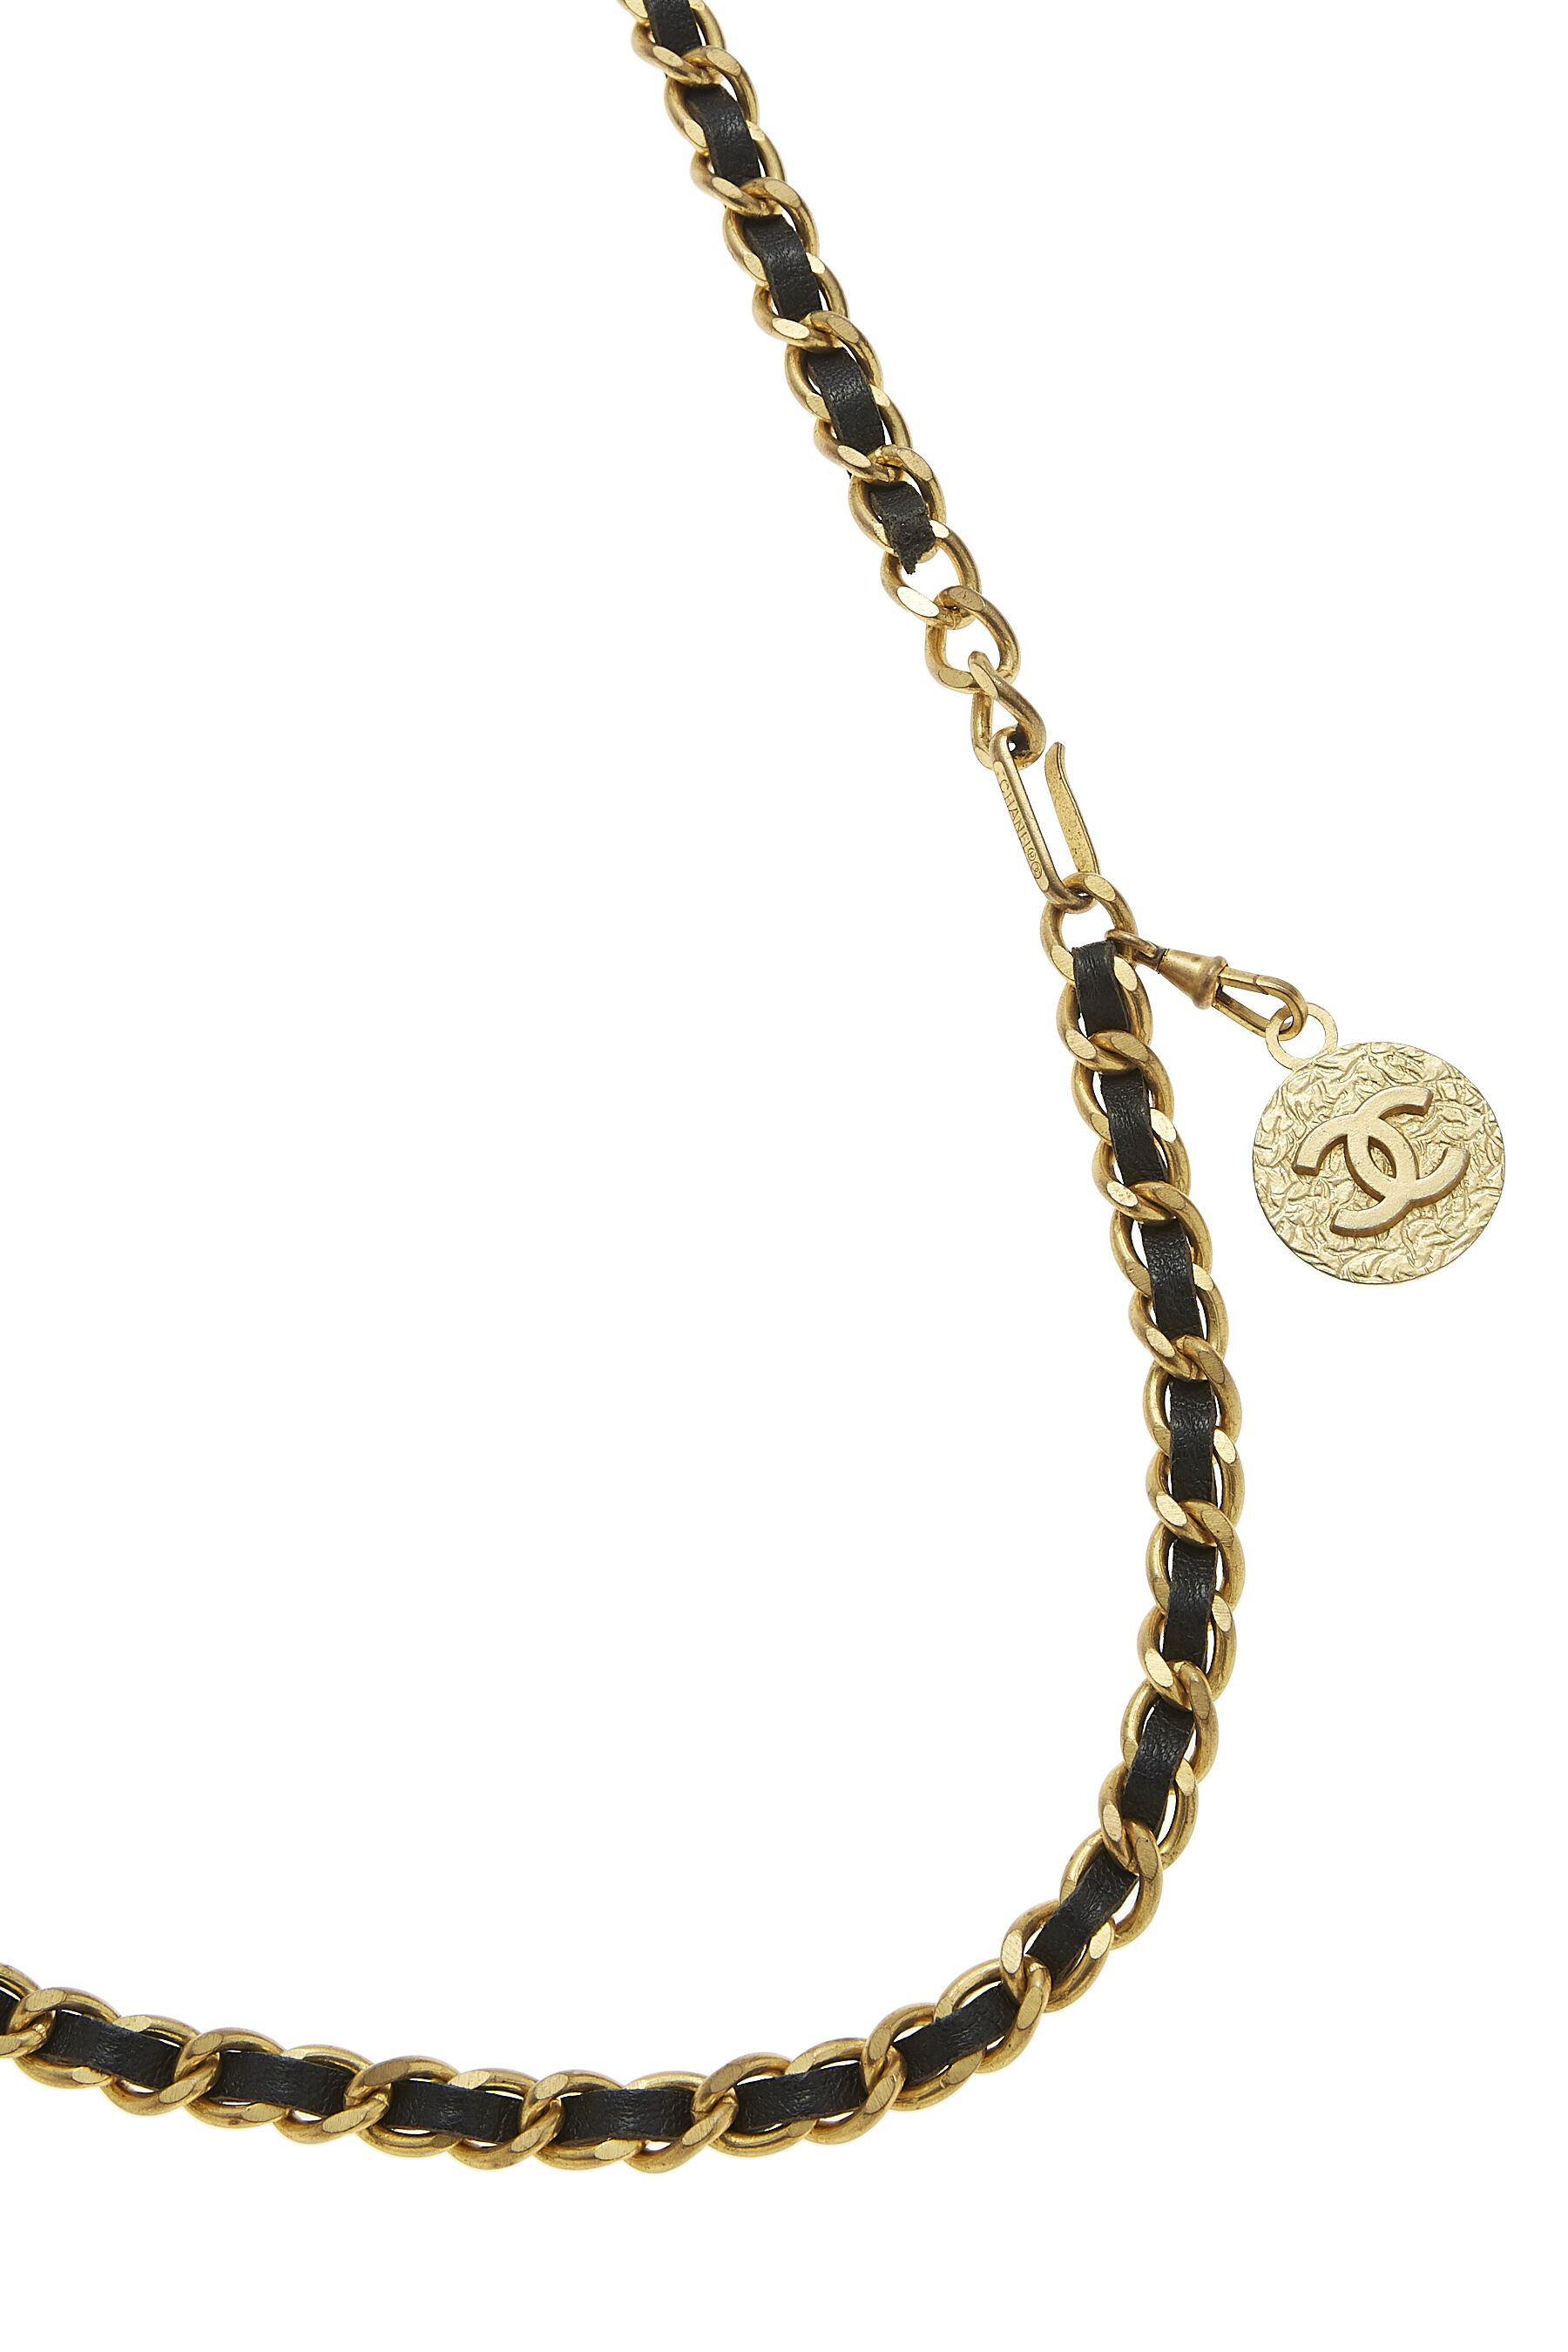 Chanel 1997 Vintage Chain Belt in Gold Tone Metal For Sale at